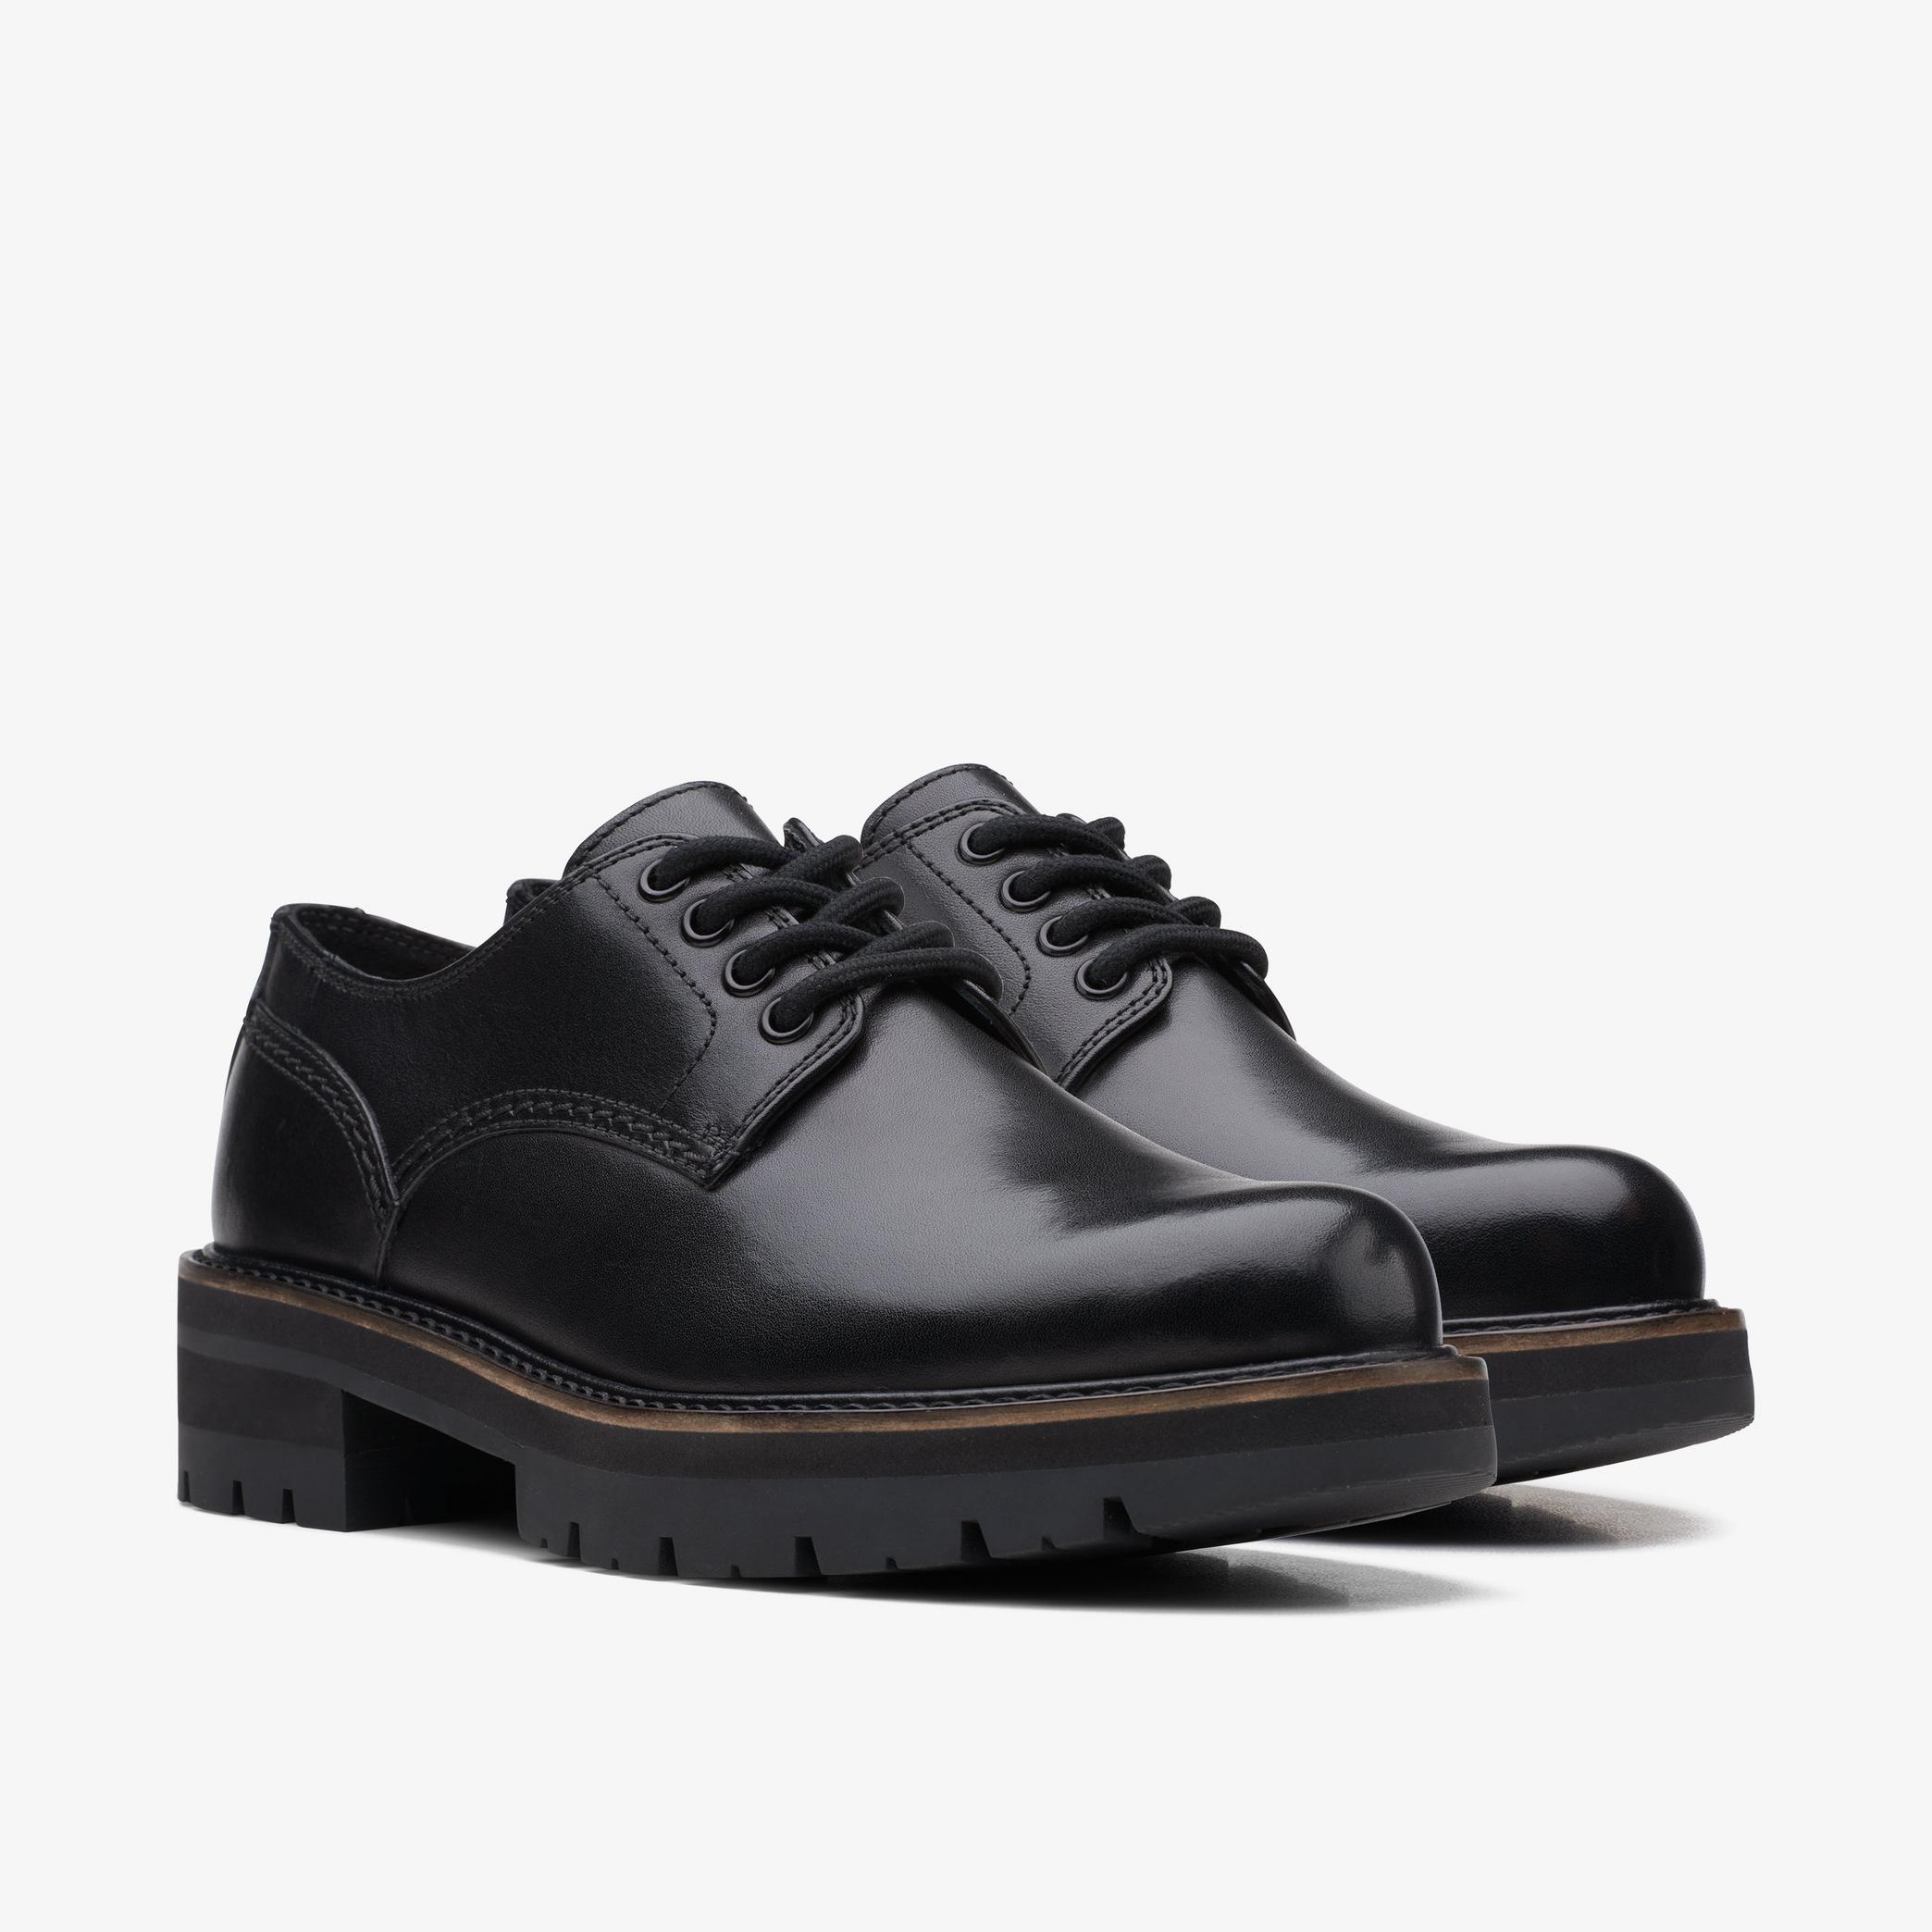 Orianna Derby Black Oxford Shoes, view 5 of 7